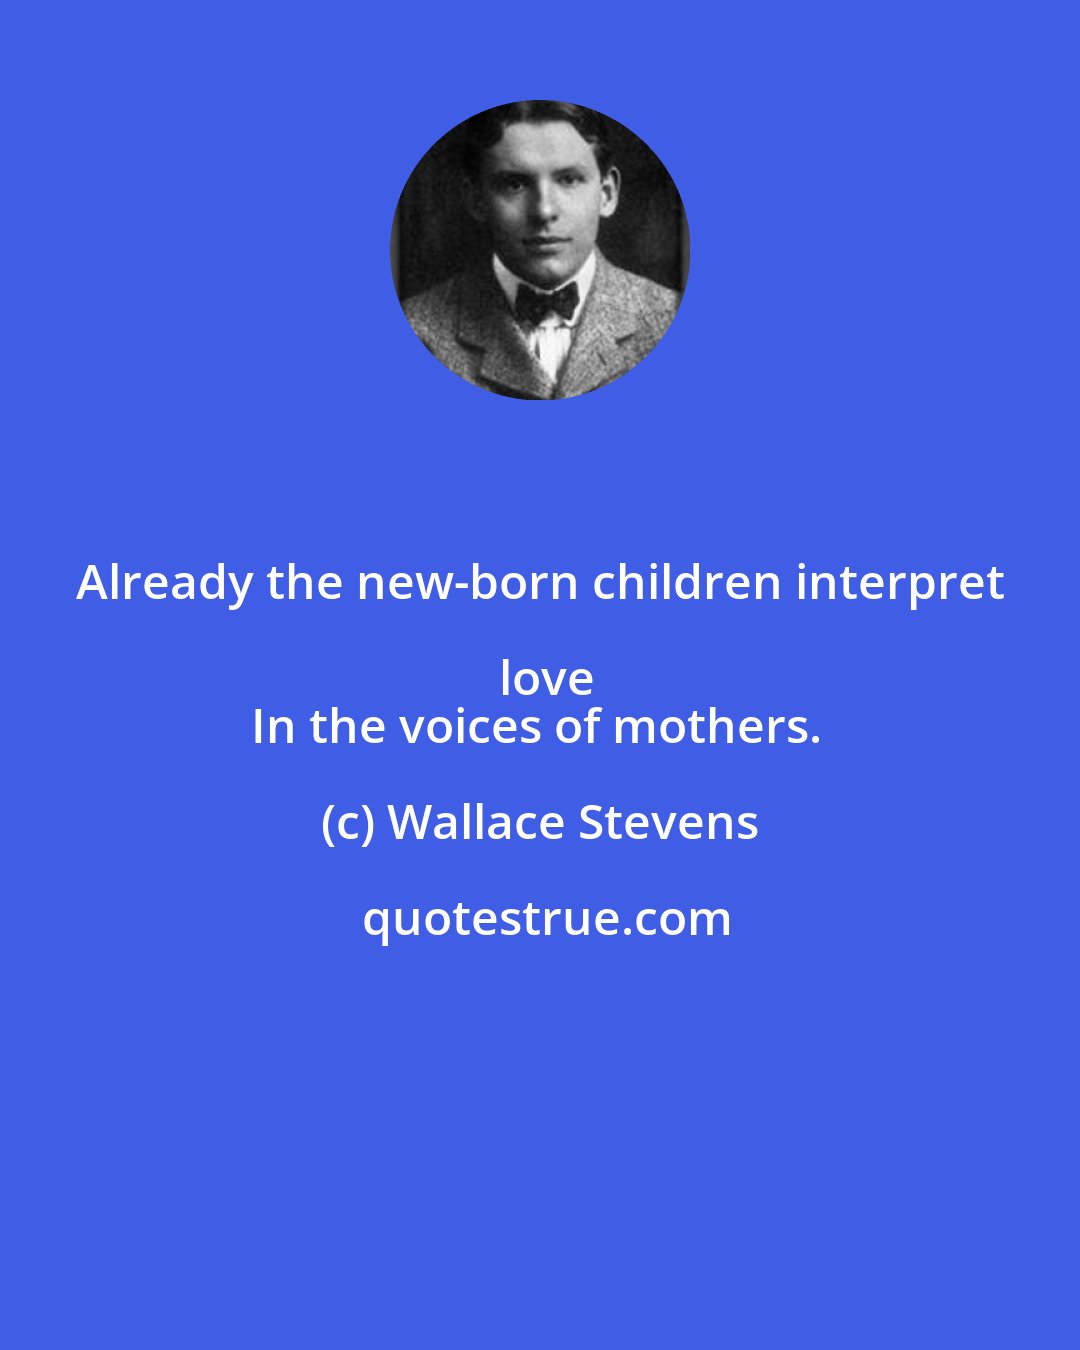 Wallace Stevens: Already the new-born children interpret love
In the voices of mothers.